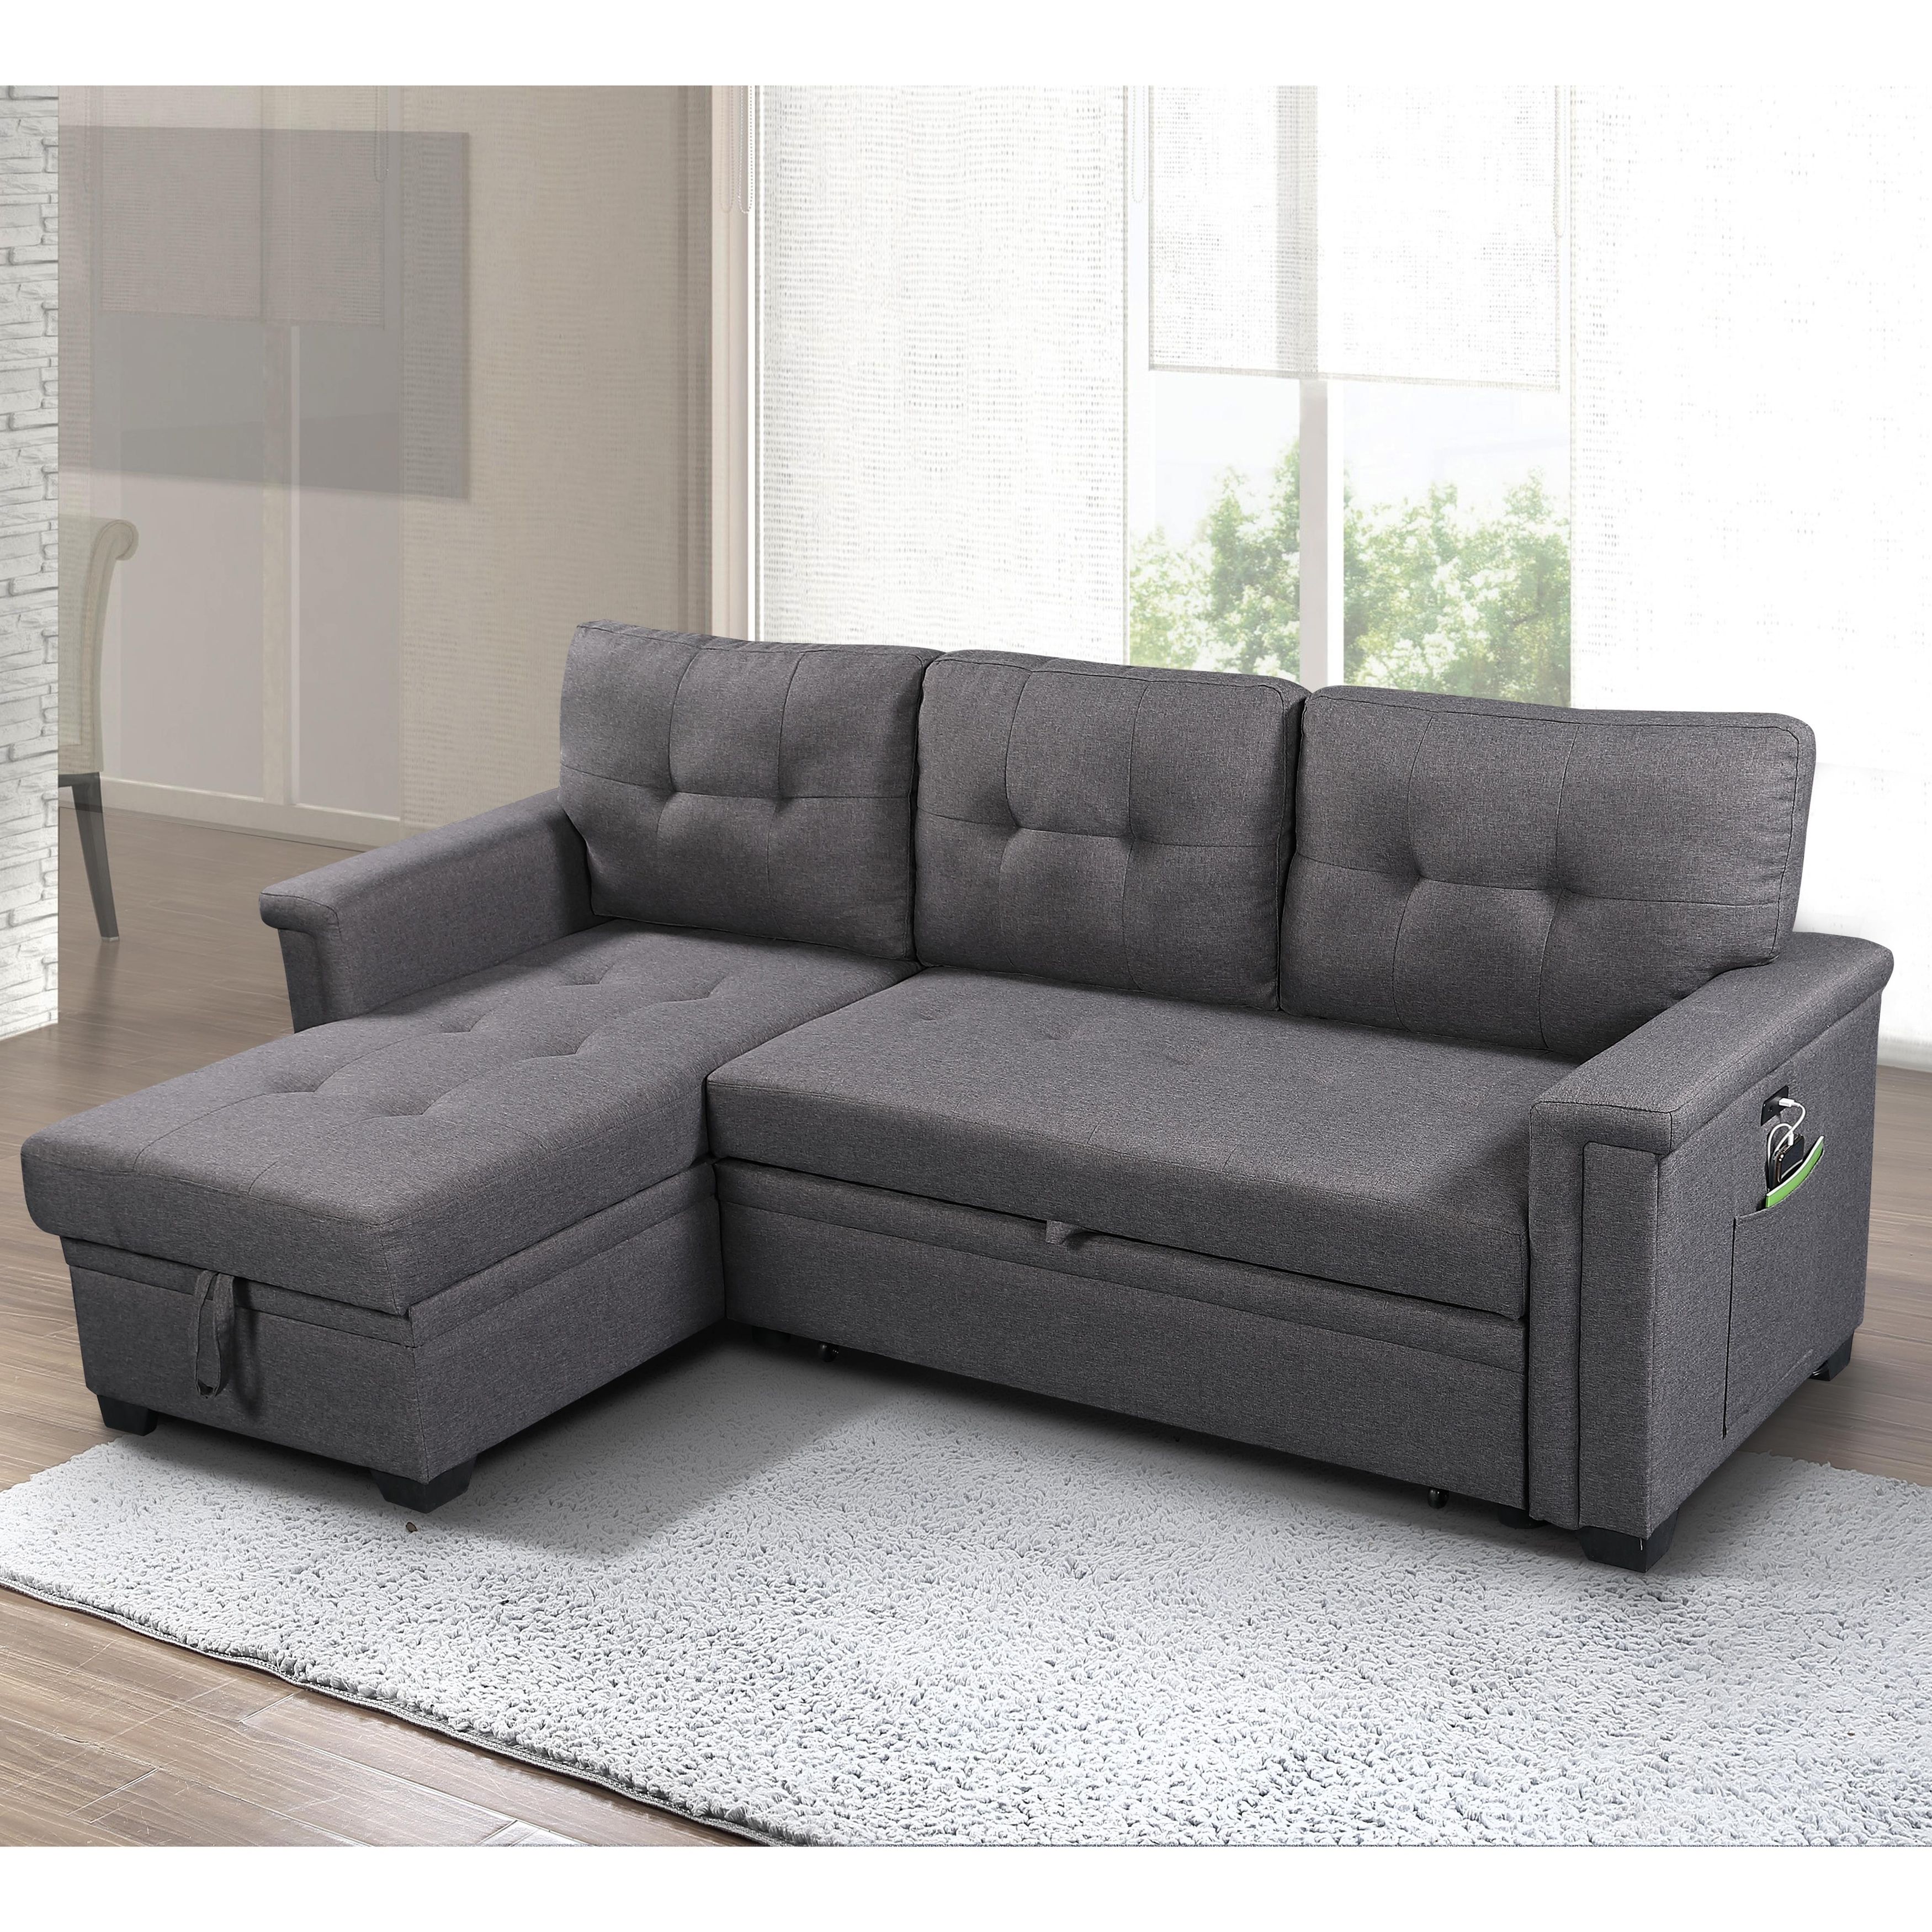 Ashlyn Reversible Sleeper Sofa With Storage Chaise – On Sale – – 30144937 Within Sectional Sofa With Storage (Gallery 2 of 20)